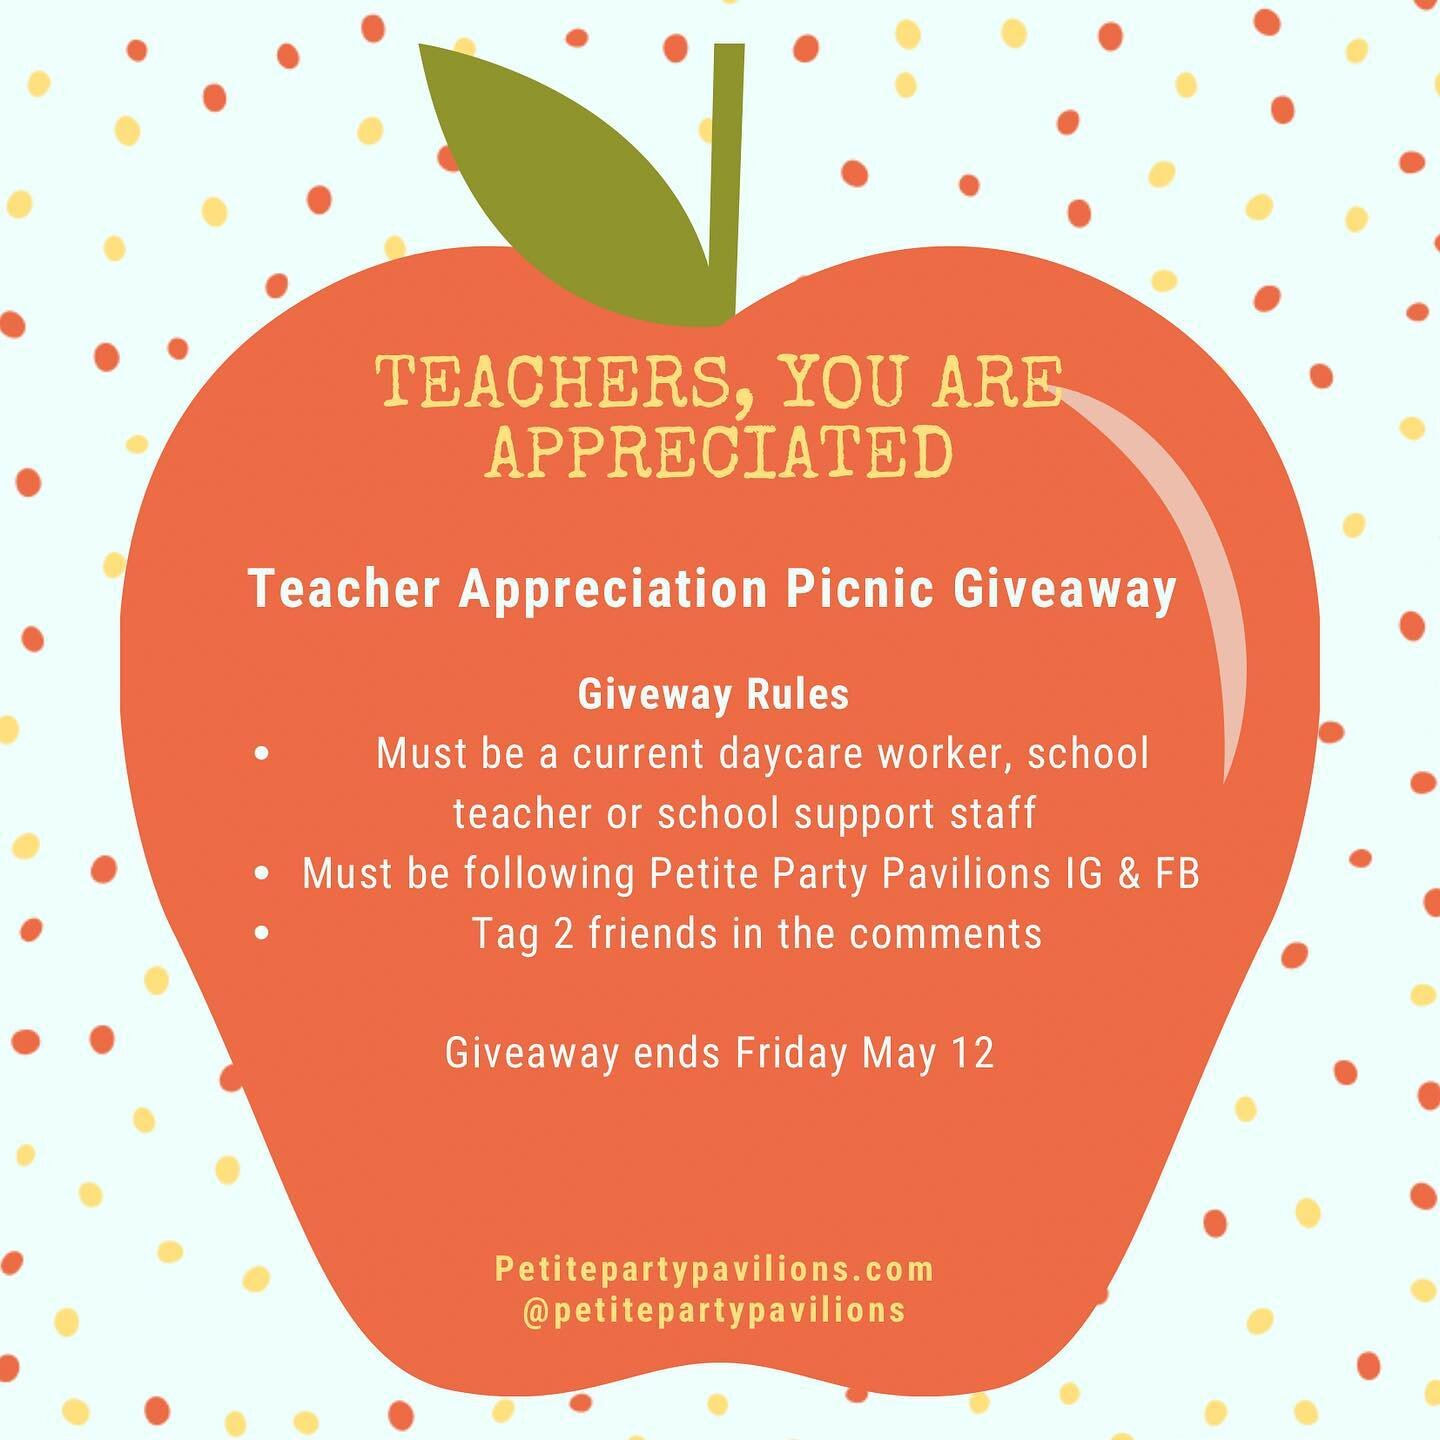 Today kicks off Teacher appreciation week. 

To show our appreciation for our local teachers, I am doing a giveaway for a 50% off any picnic crevice of their choosing to 1 special teacher, daycare worker or school support staff. 

Please follow ALL o